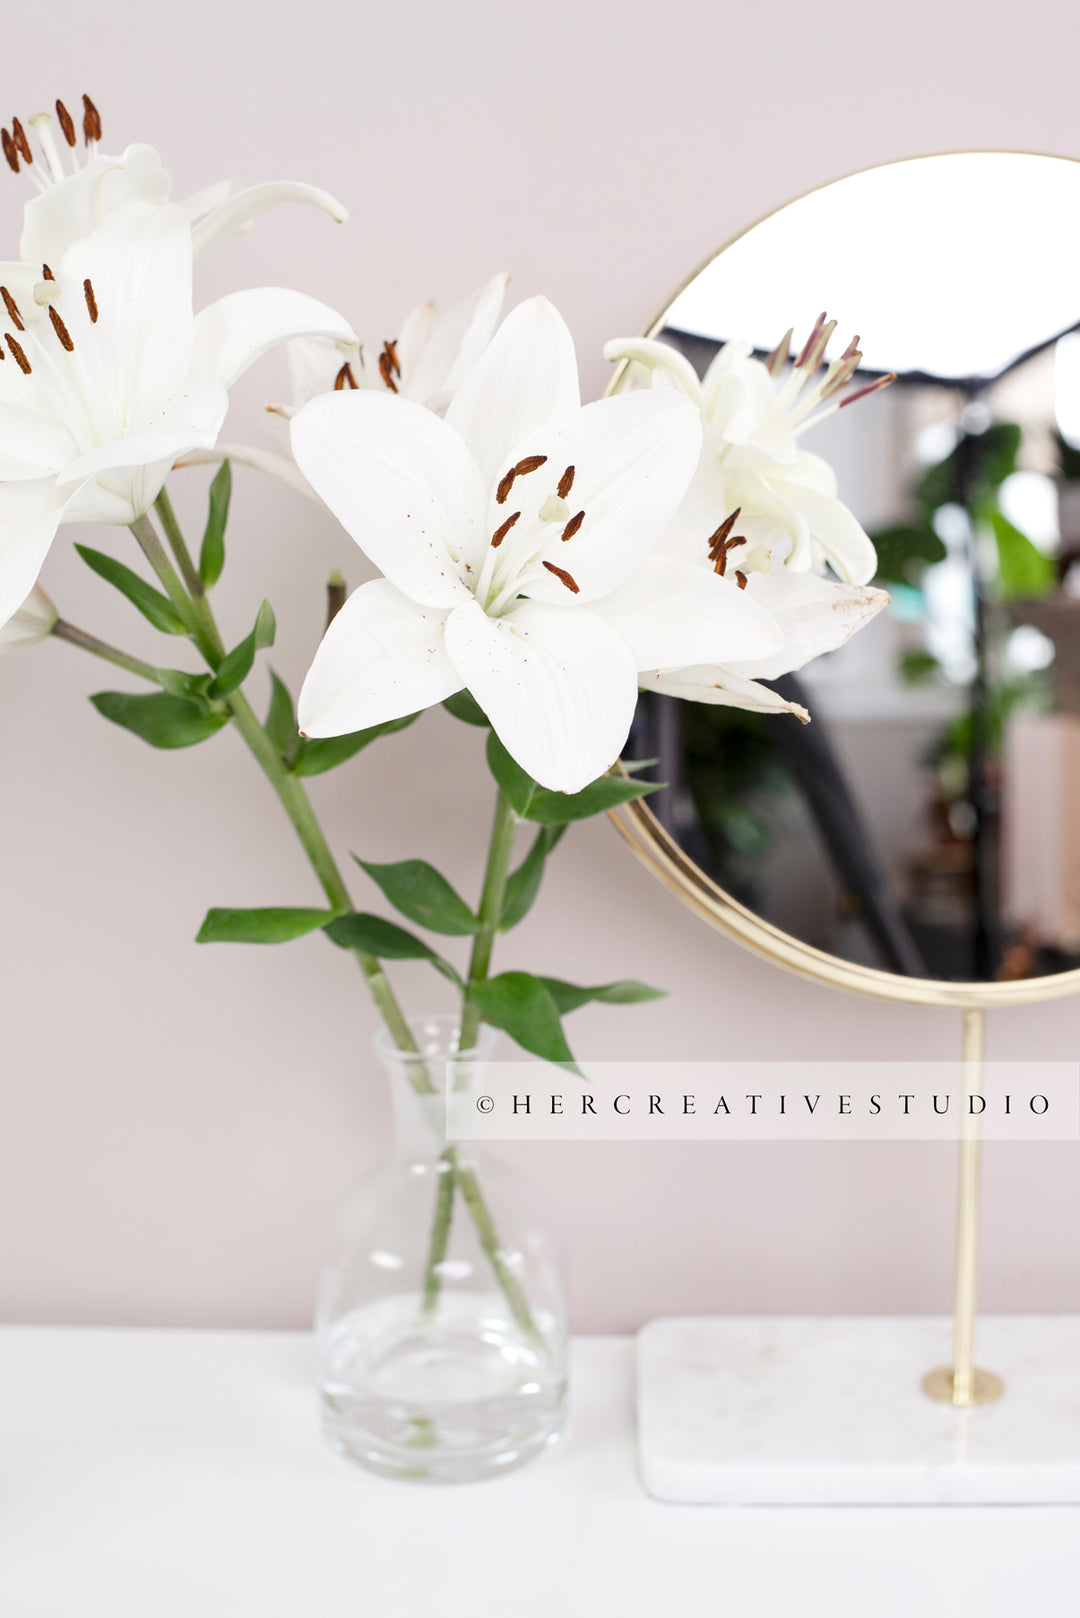 Lillies & Mirror on Table, Styled Stock